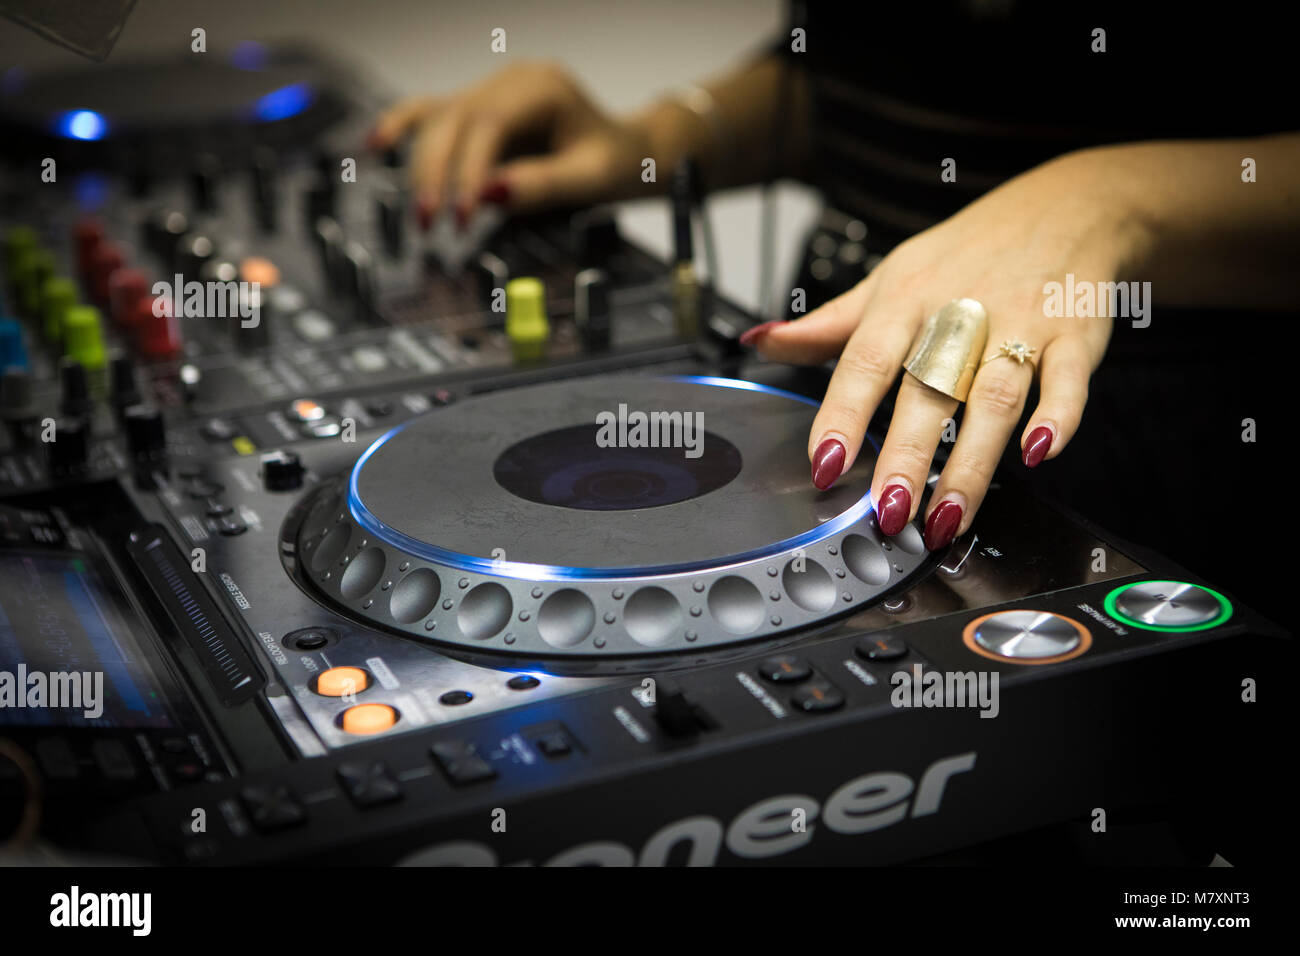 Female DJ with red fingernails on CDJ's and mixer. Stock Photo